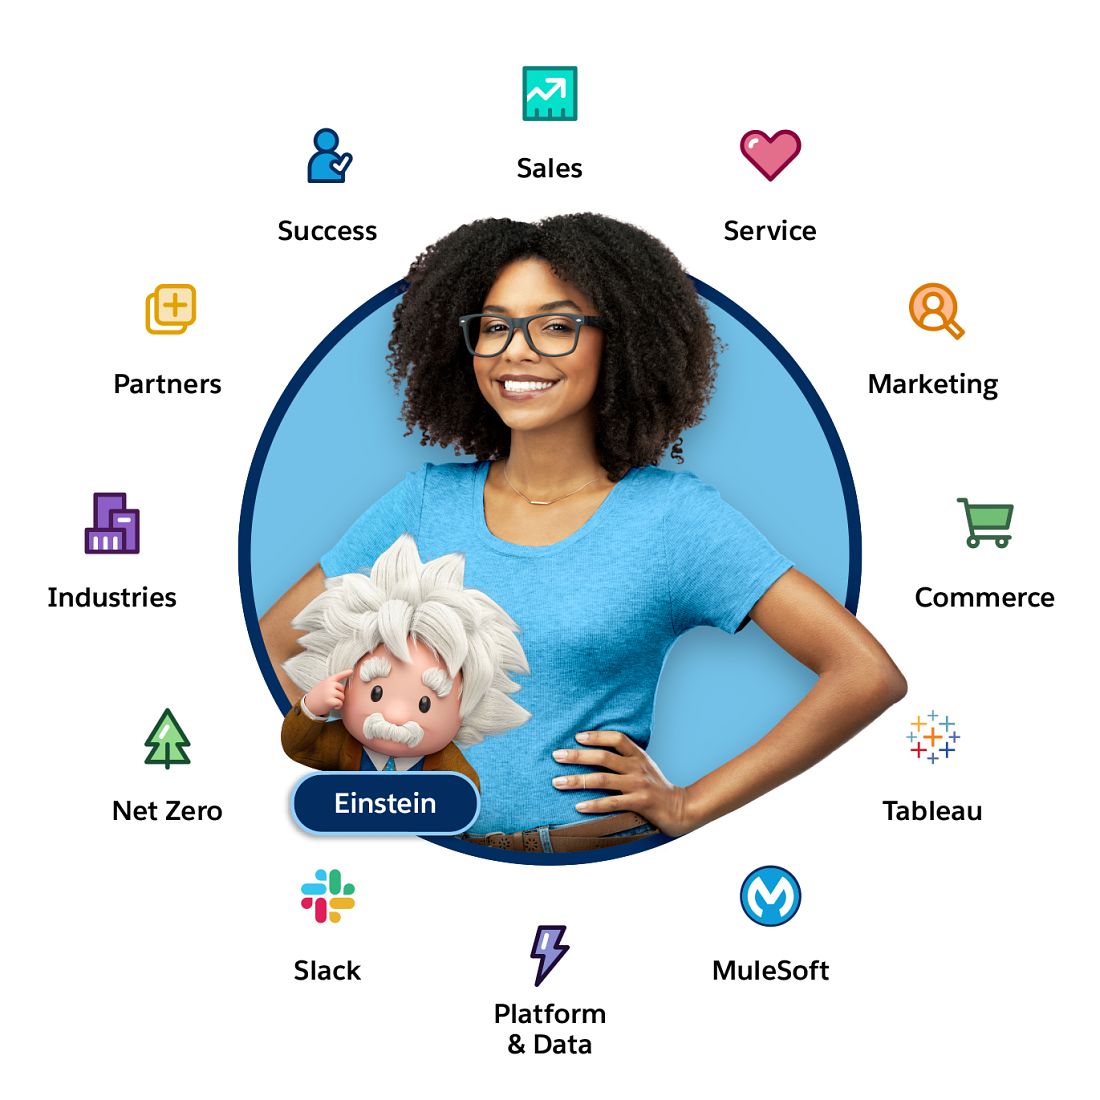 An illustration of Salesforce's Customer 360 product with different apps for marketing, commerce, service and other categories.